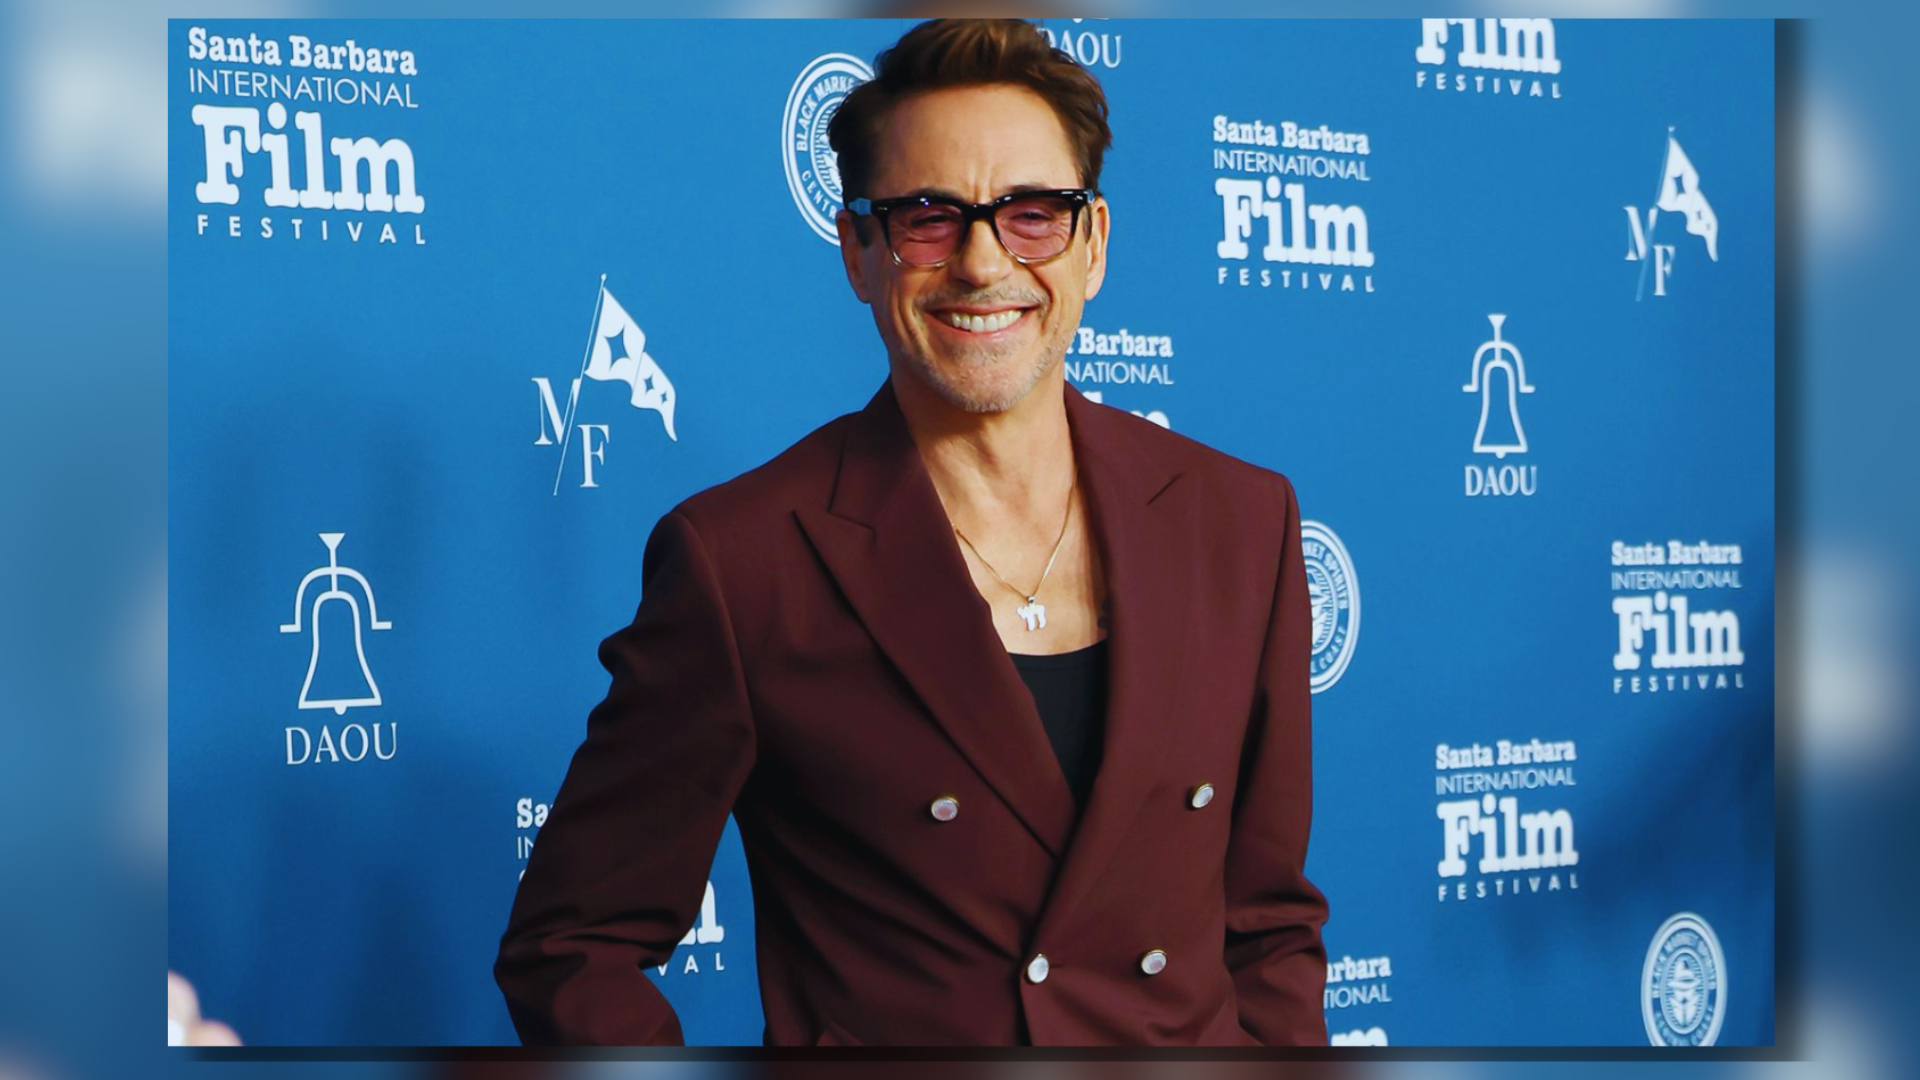 Robert Downey Jr: Aging Like Fine Wine, Celebrating Another Year Of Iconic Performances